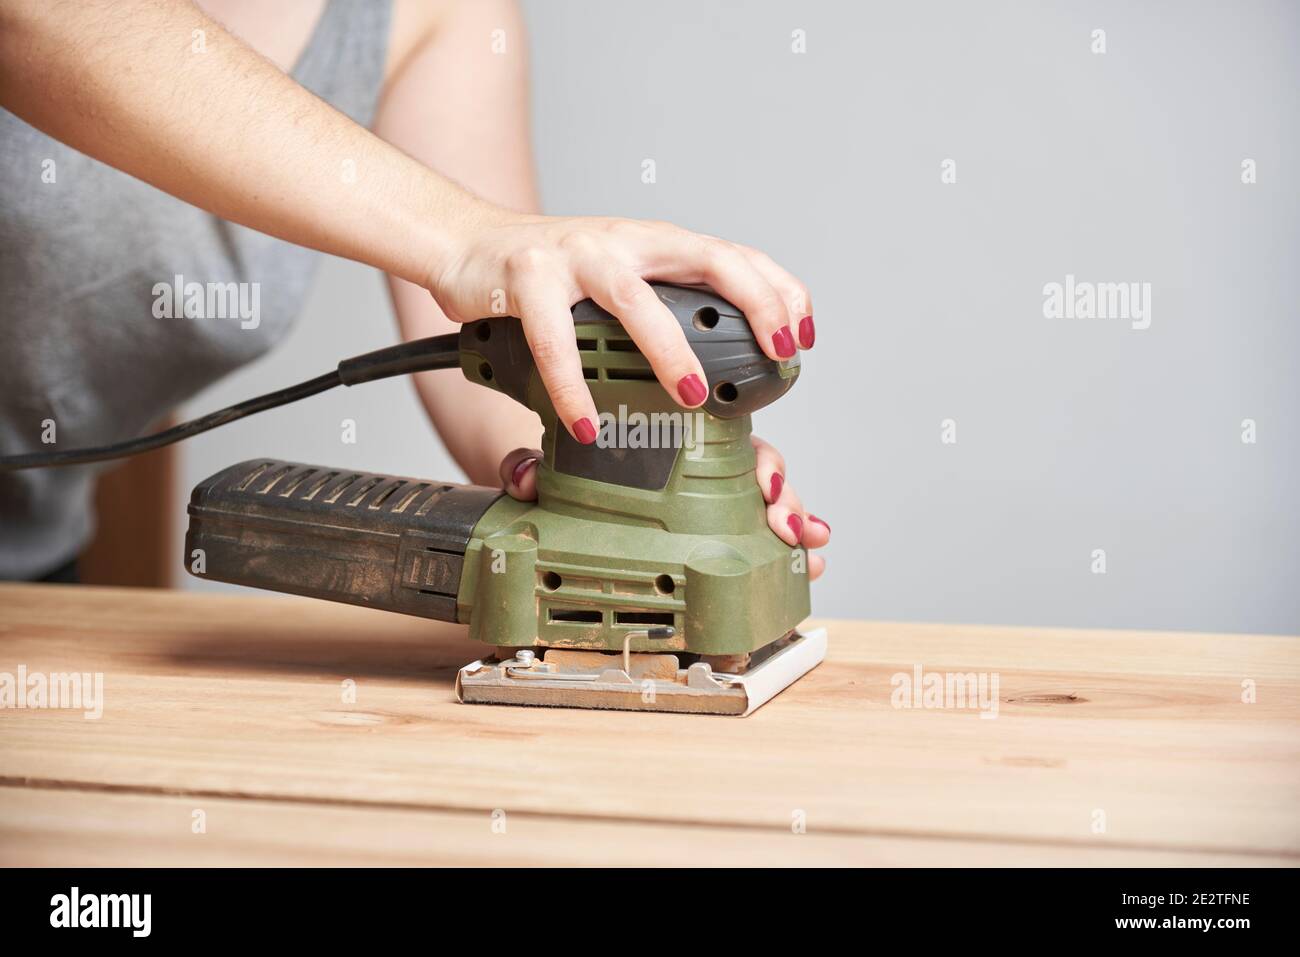 Carpentry work, detail of a young caucasian woman with her nails done sanding wood, using an electric sander. Stock Photo